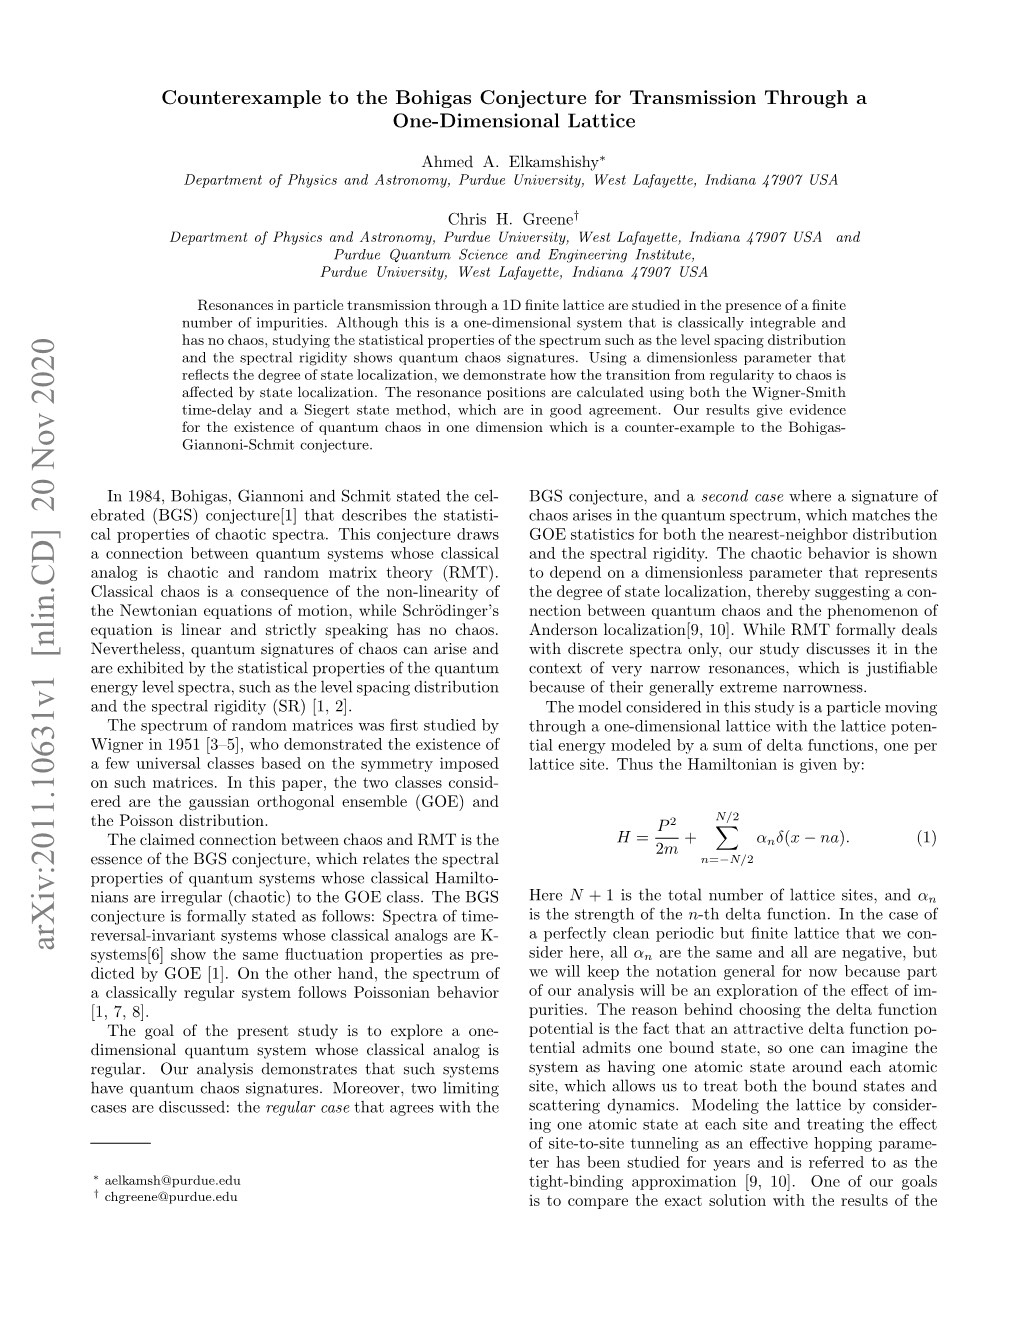 Counterexample to the Bohigas Conjecture for Transmission Through a One-Dimensional Lattice